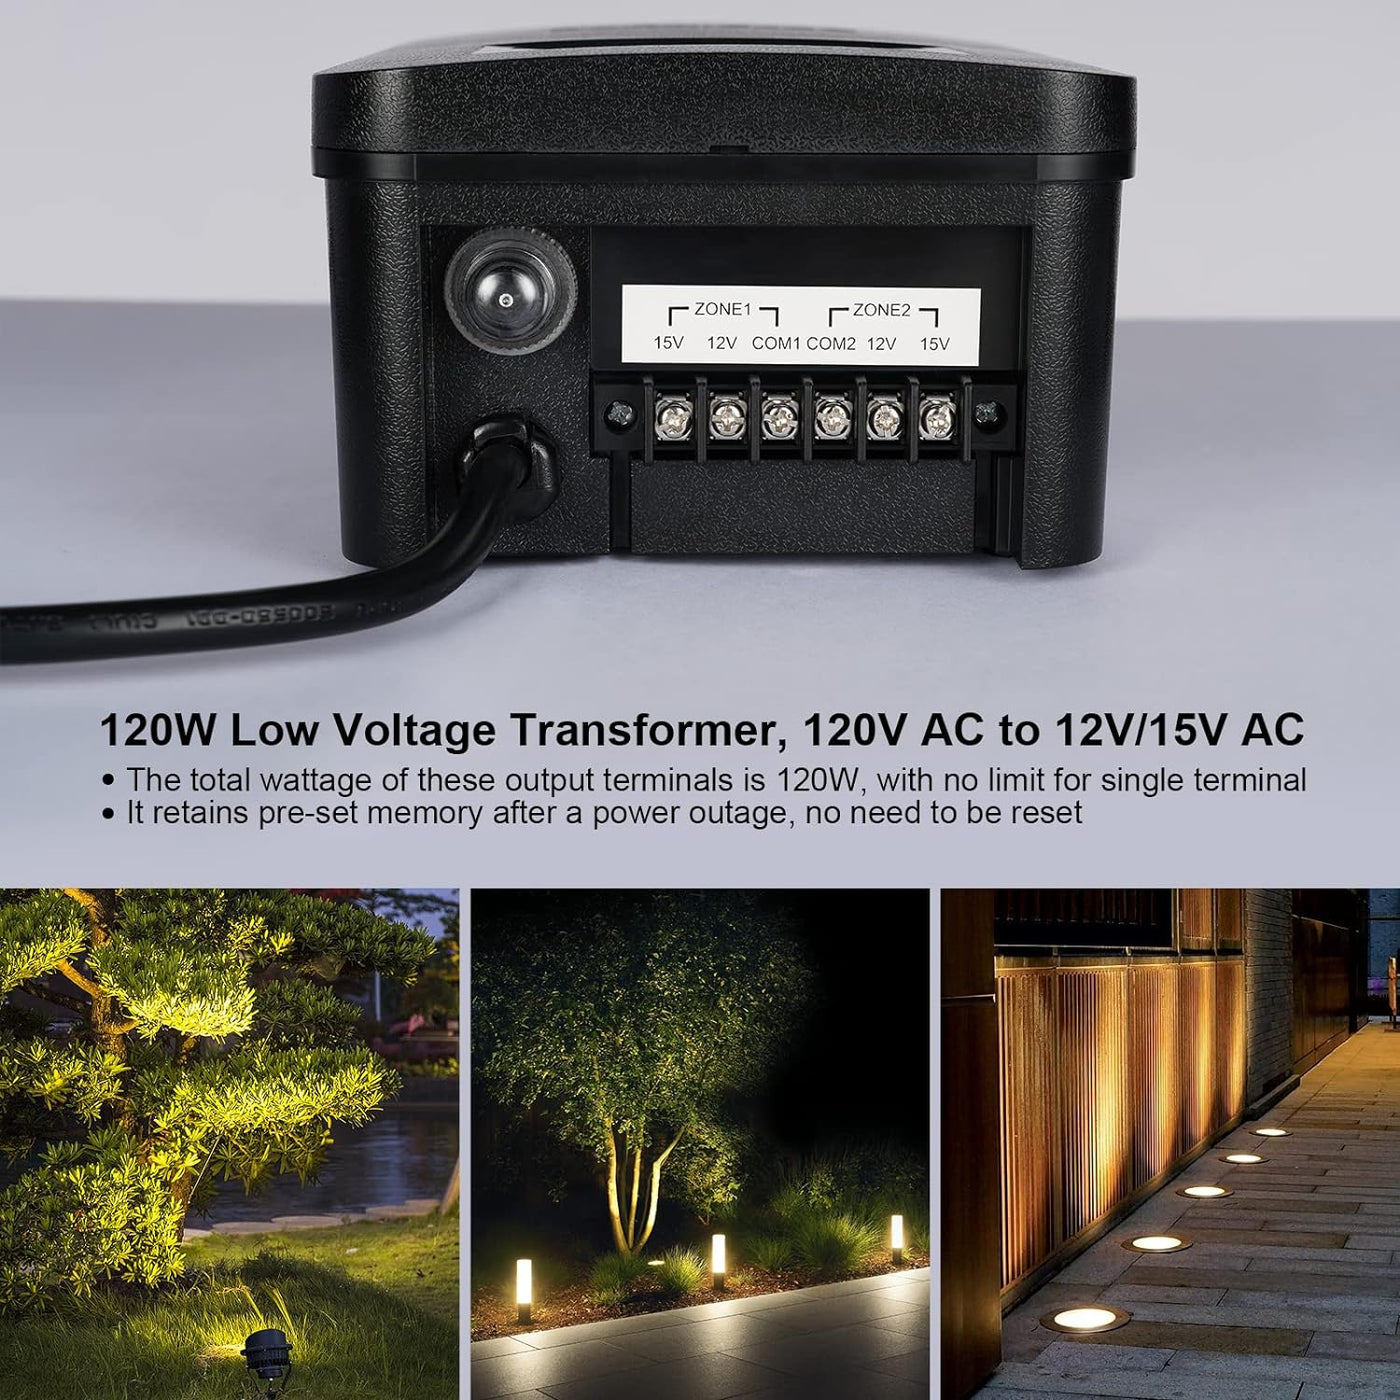 Suraielec 120W Low Voltage Transformer with Photocell Sensor and Timer - $30